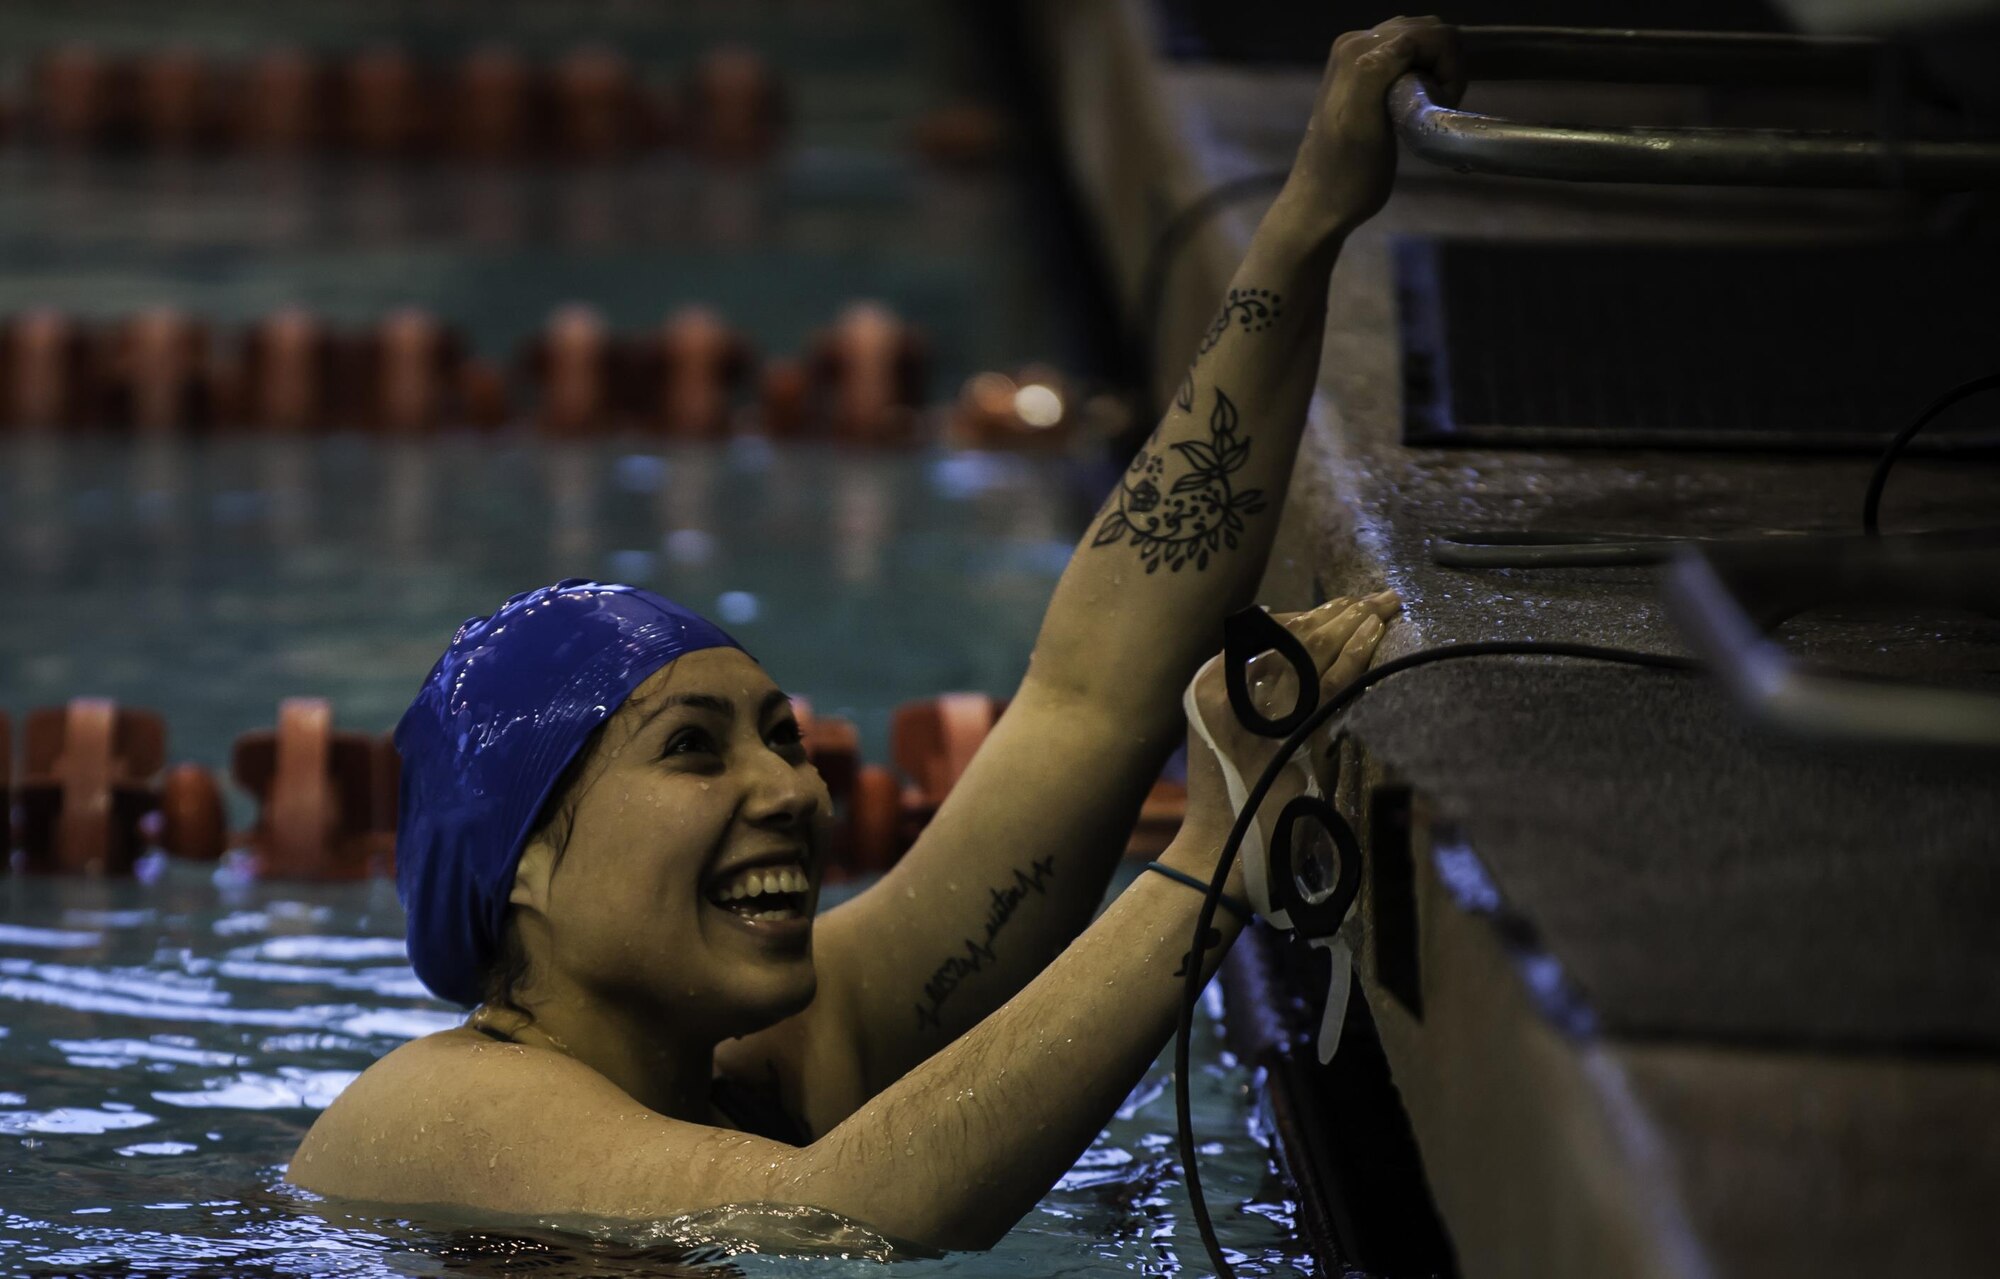 Maria Garcia, Air Force Wounded Warrior Trials competitor, smiles after finishing her competition during the AFW2 at the University of Nevada Las Vegas pool, Feb. 26, 2017. Maria is one of the United States Army competitors that Nellis AFB is playing host to. (U.S. Air Force photo by Airman 1st Class Kevin Tanenbaum/Released)